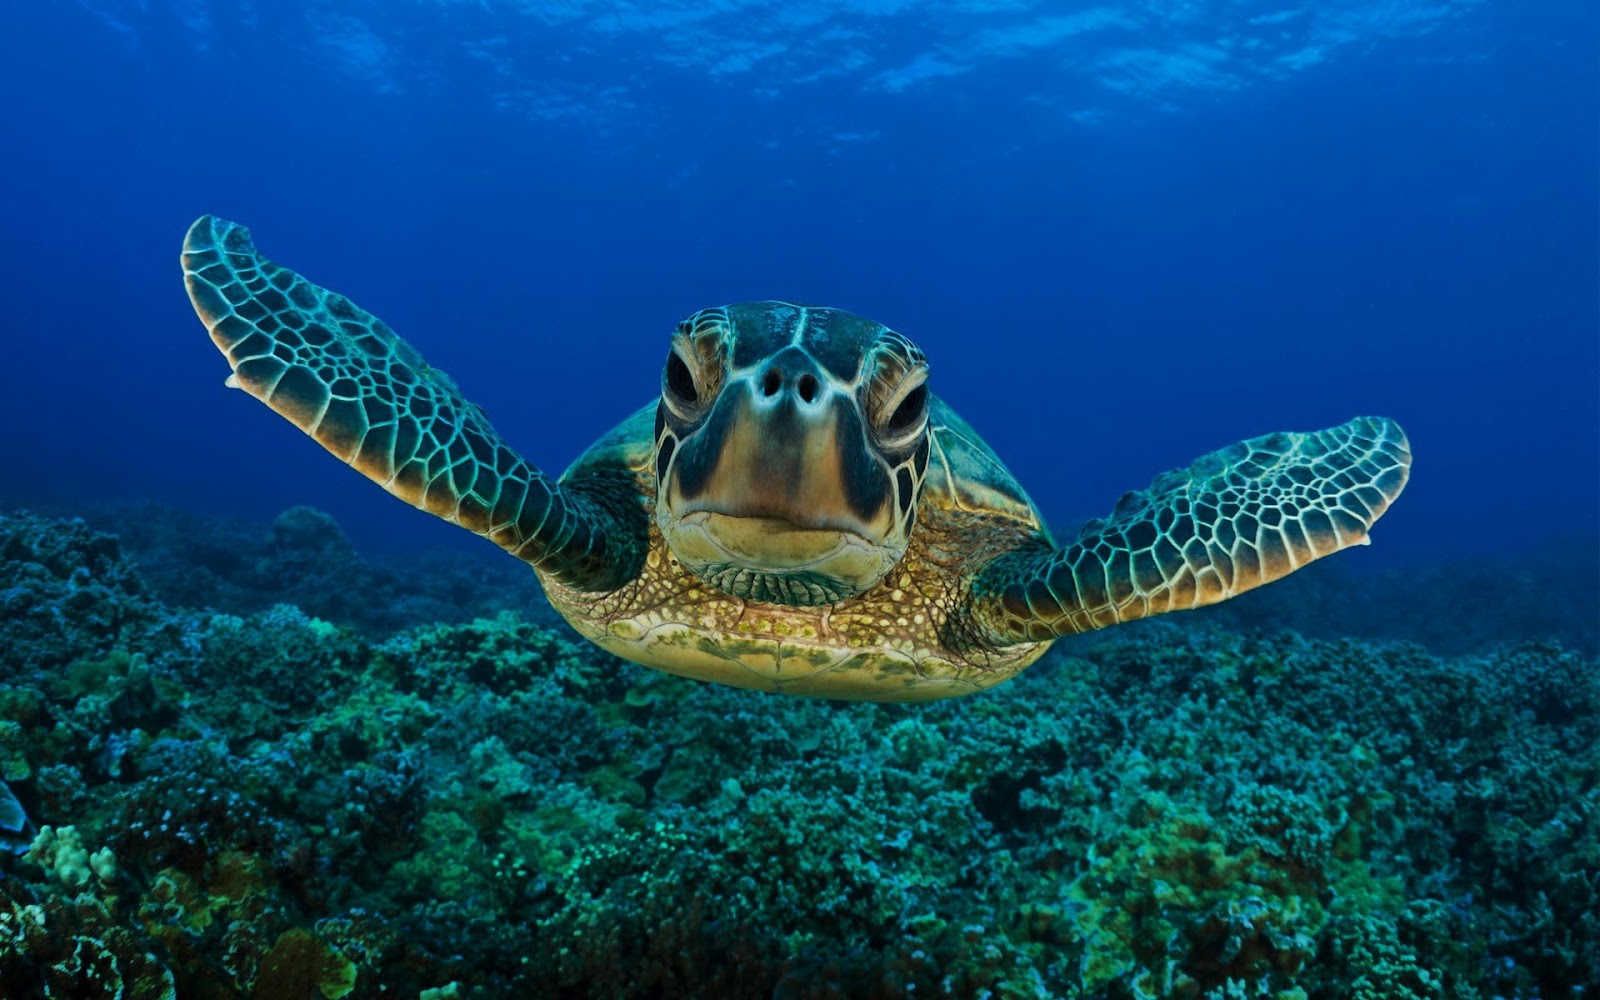 HD Animal Wallpaper With The Picture Of A Swimming Turtle Underwater